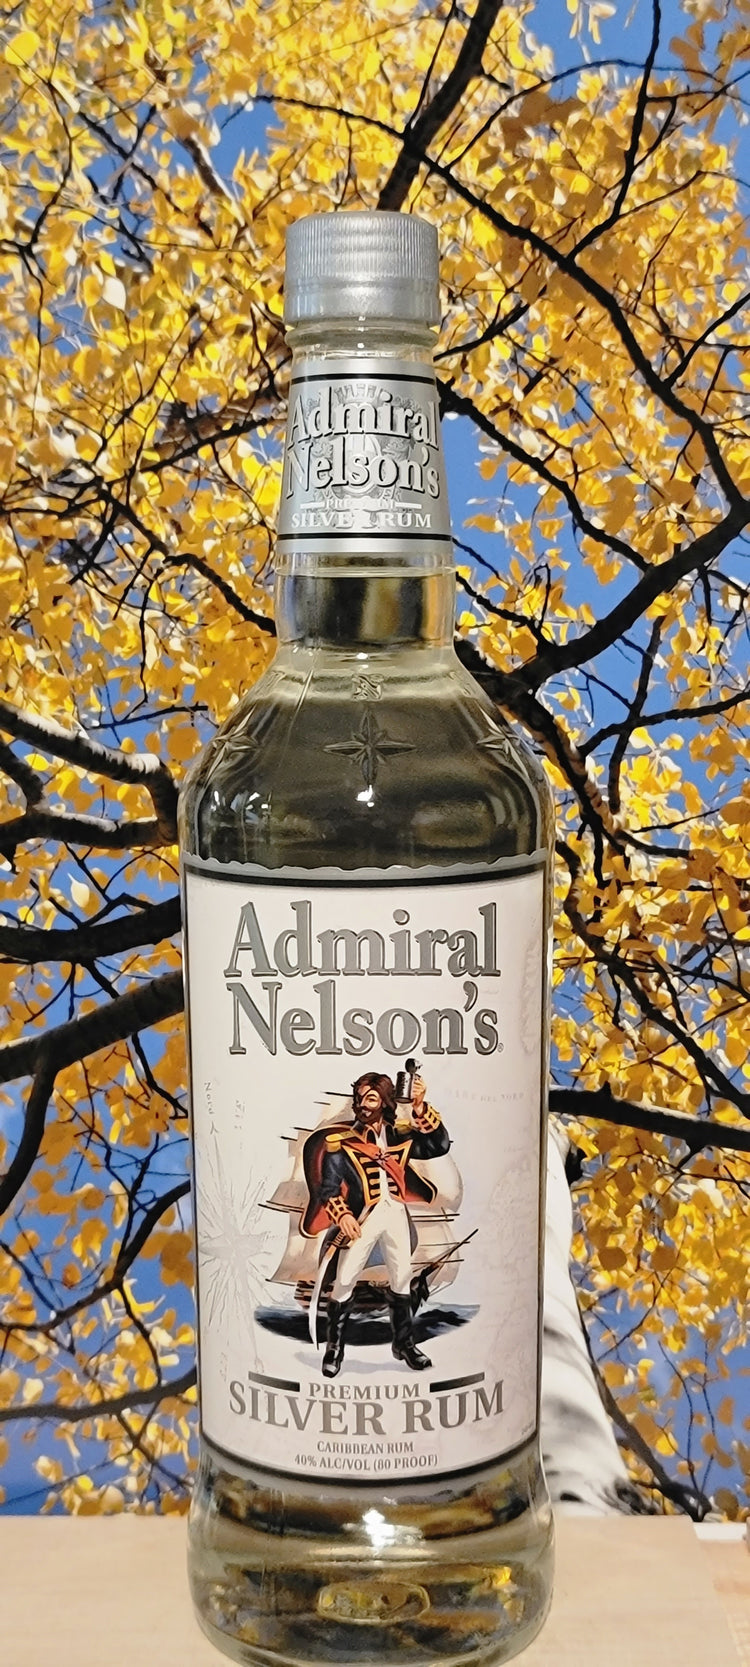 Admiral nelson's silver rum